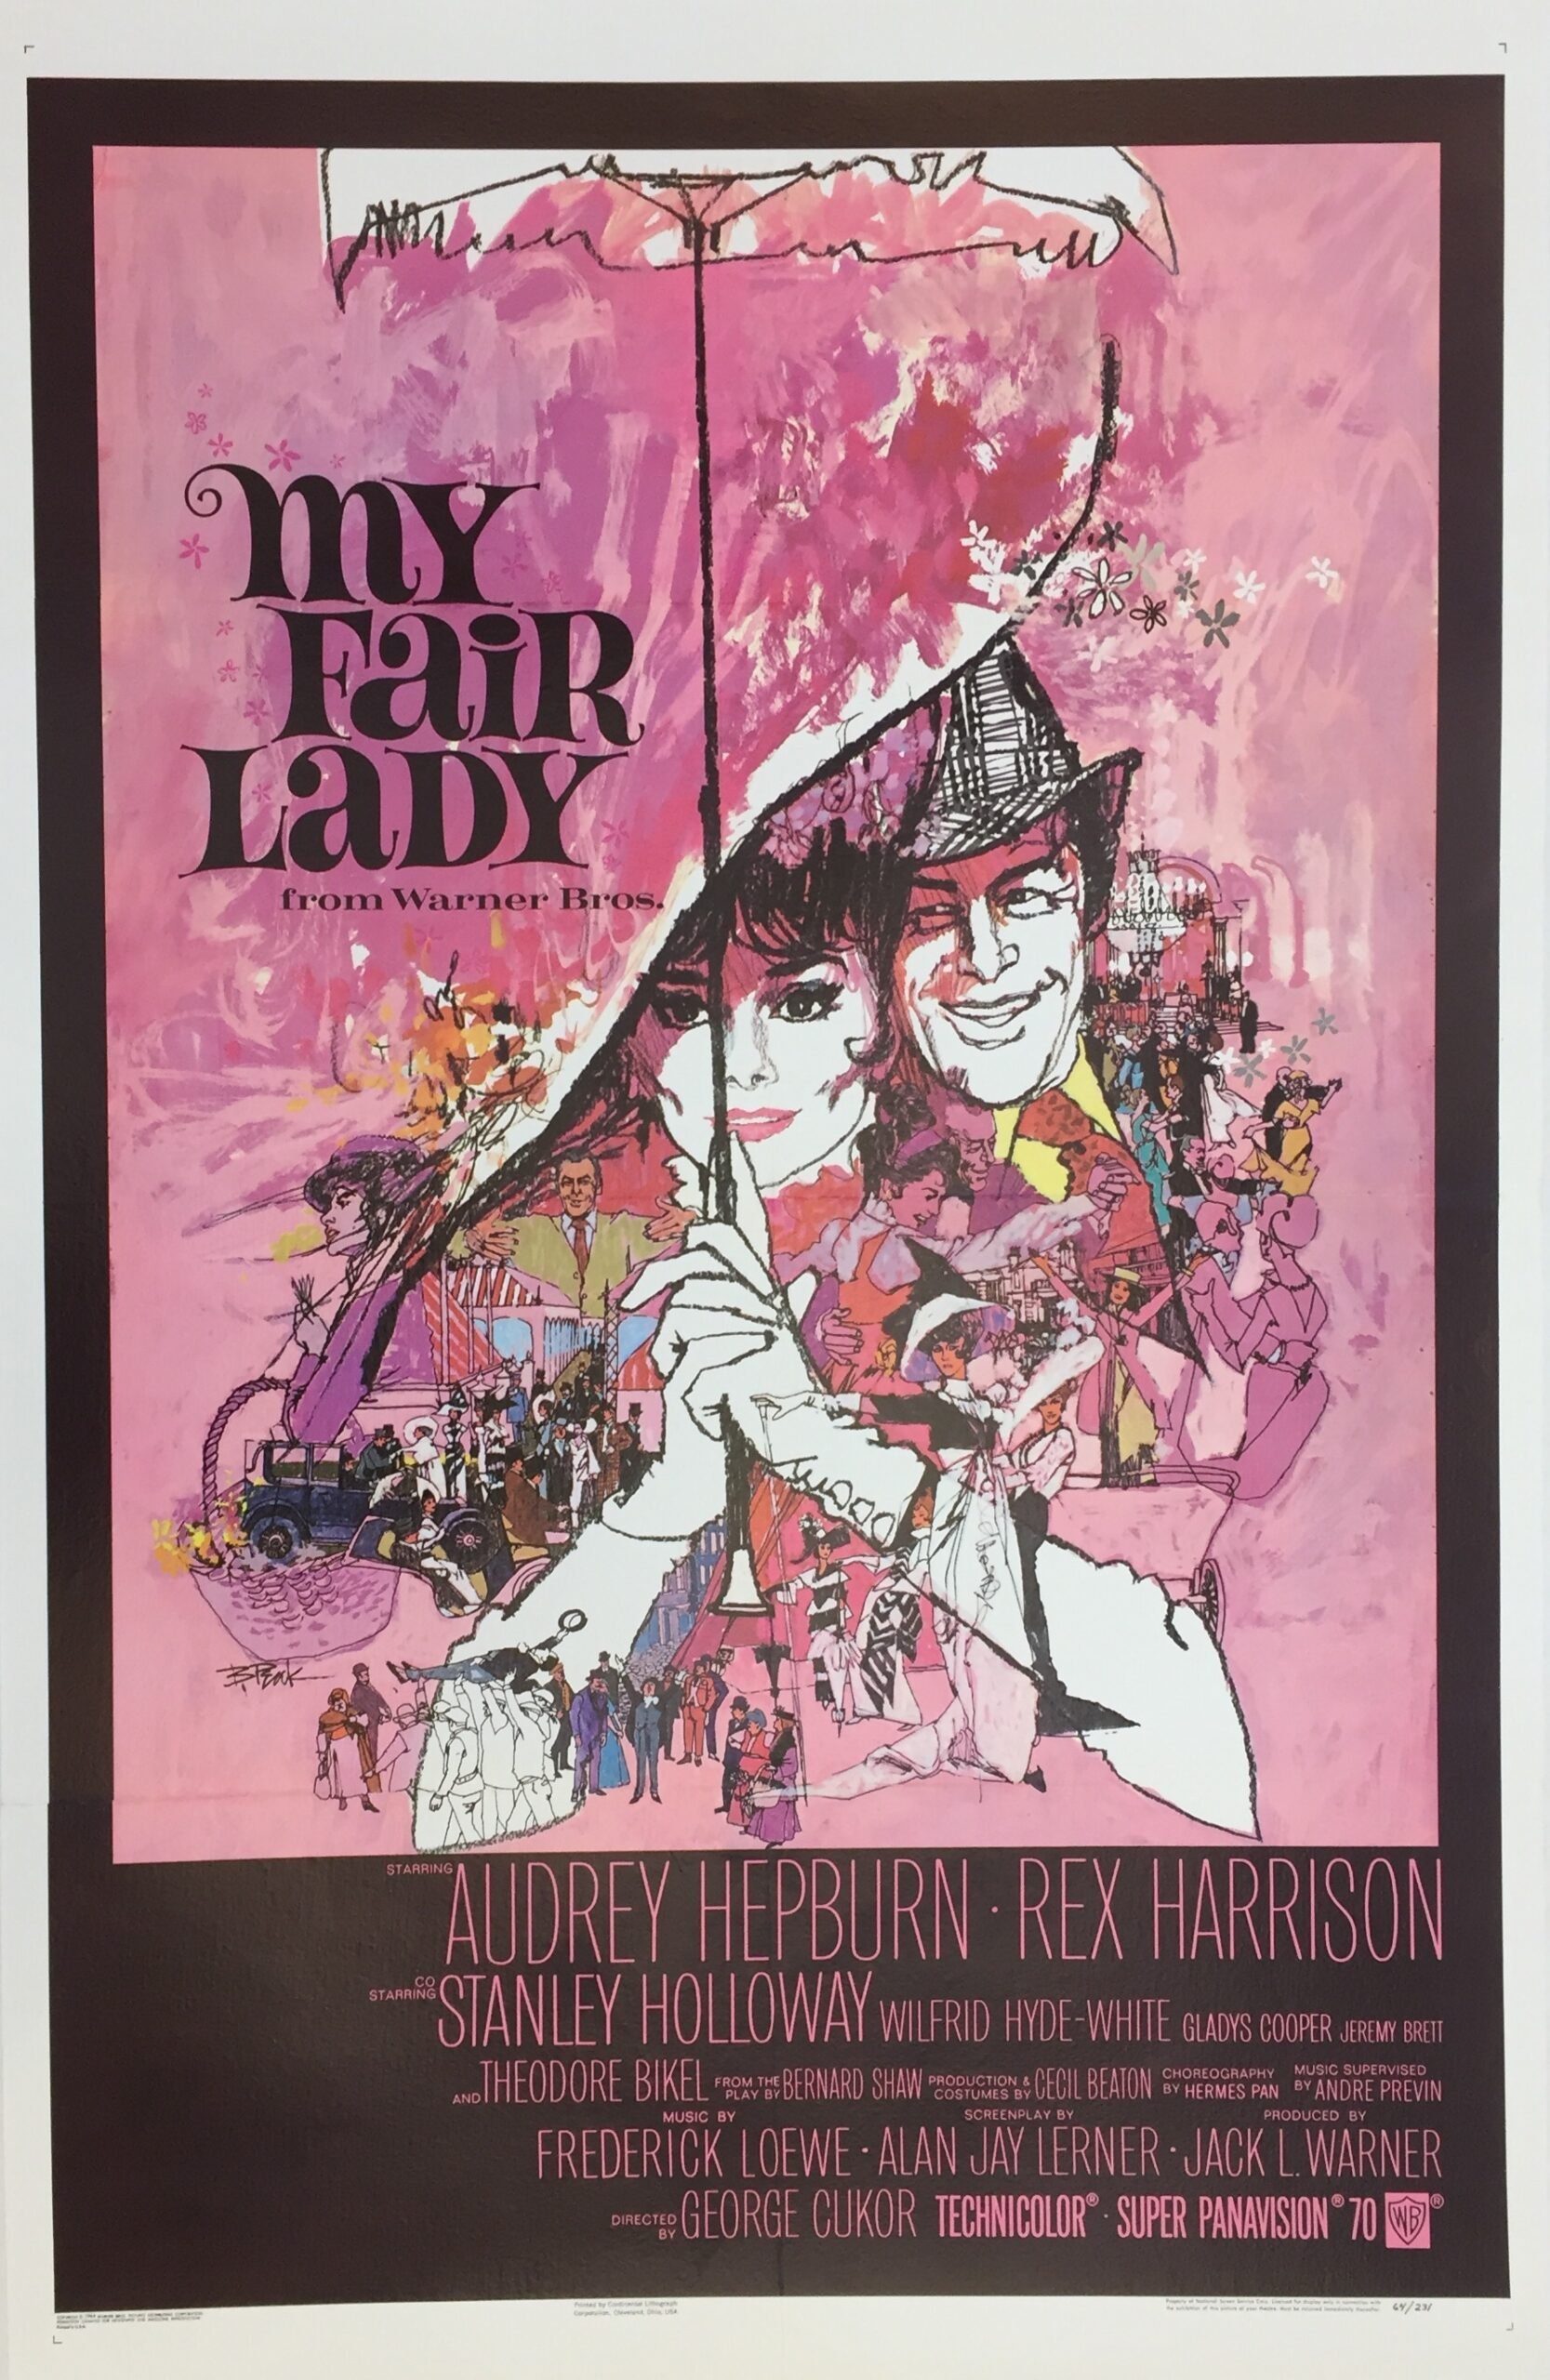 Original vintage cinema movie poster for the musical, My Fair Lady